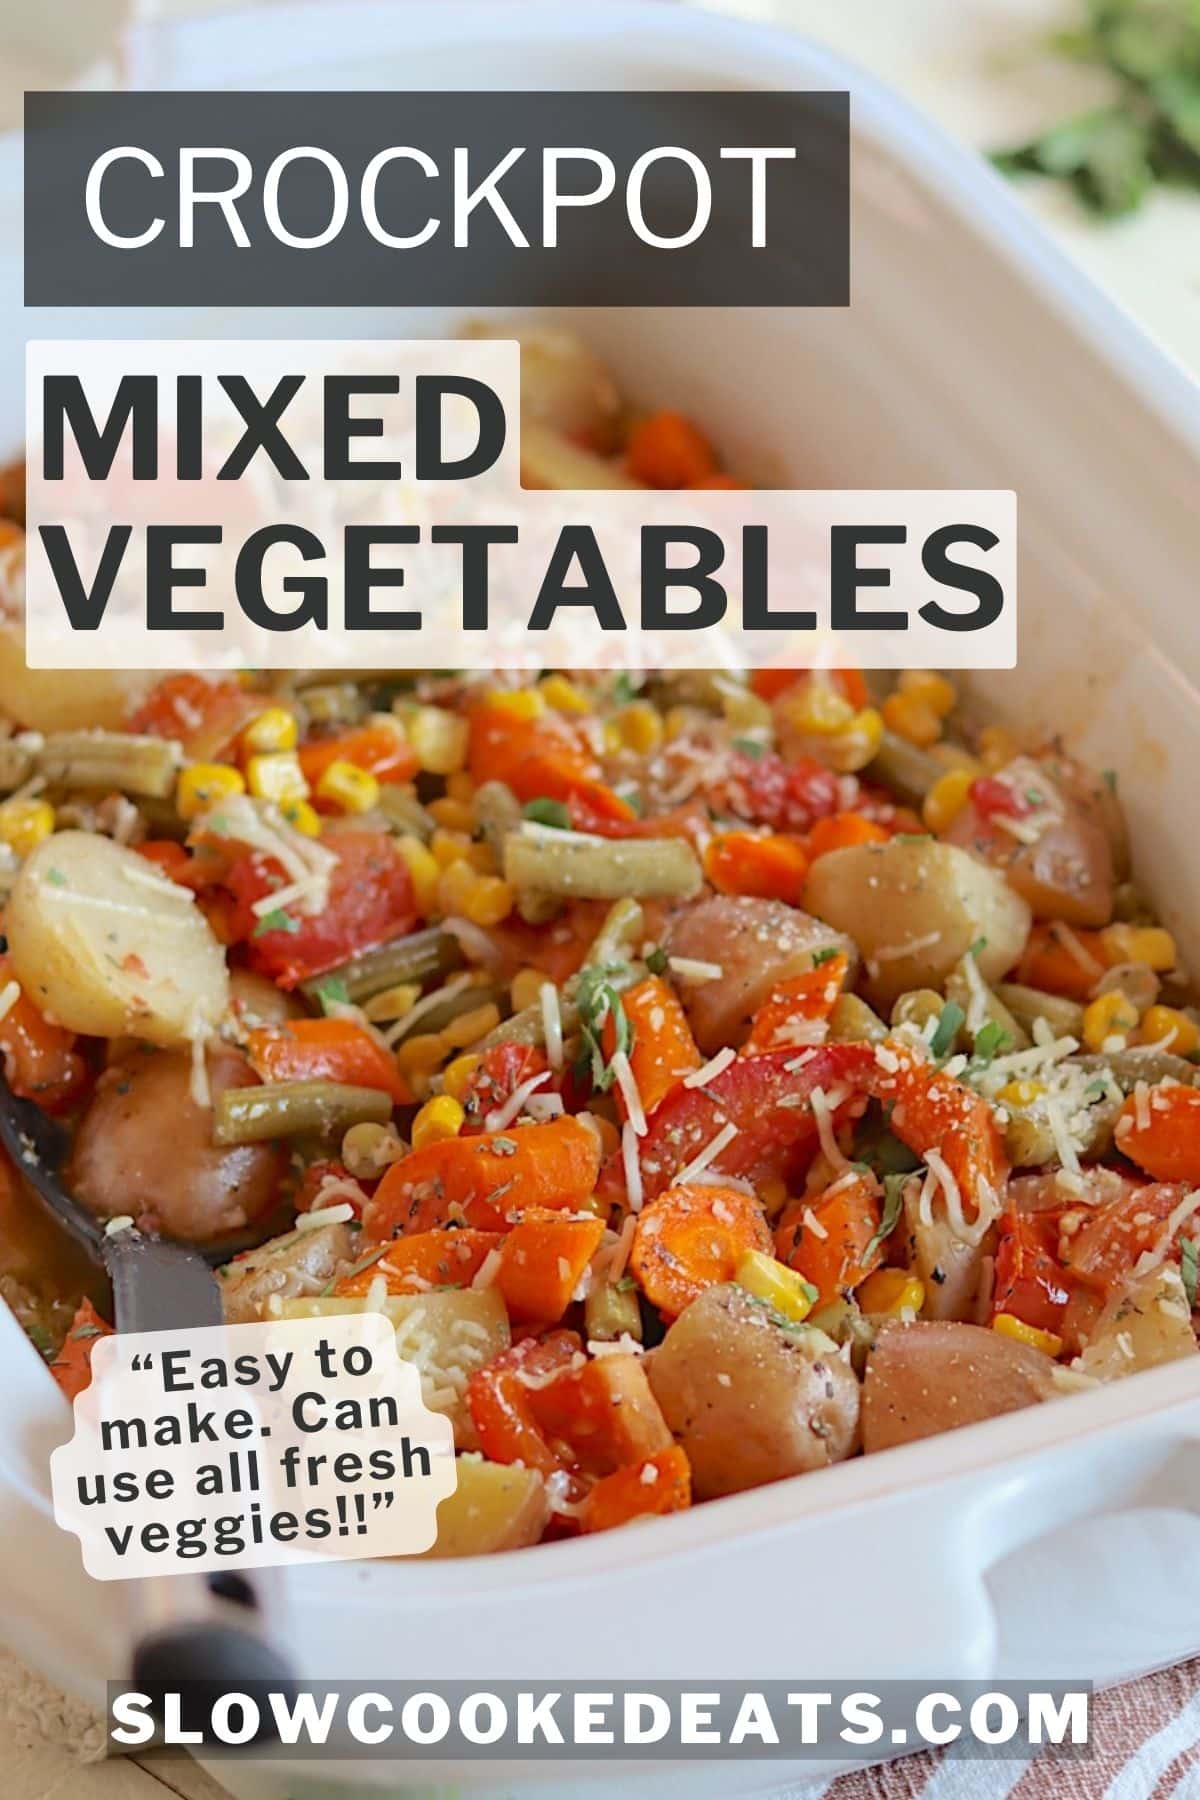 Slow cooker vegetables in a white crockpot.